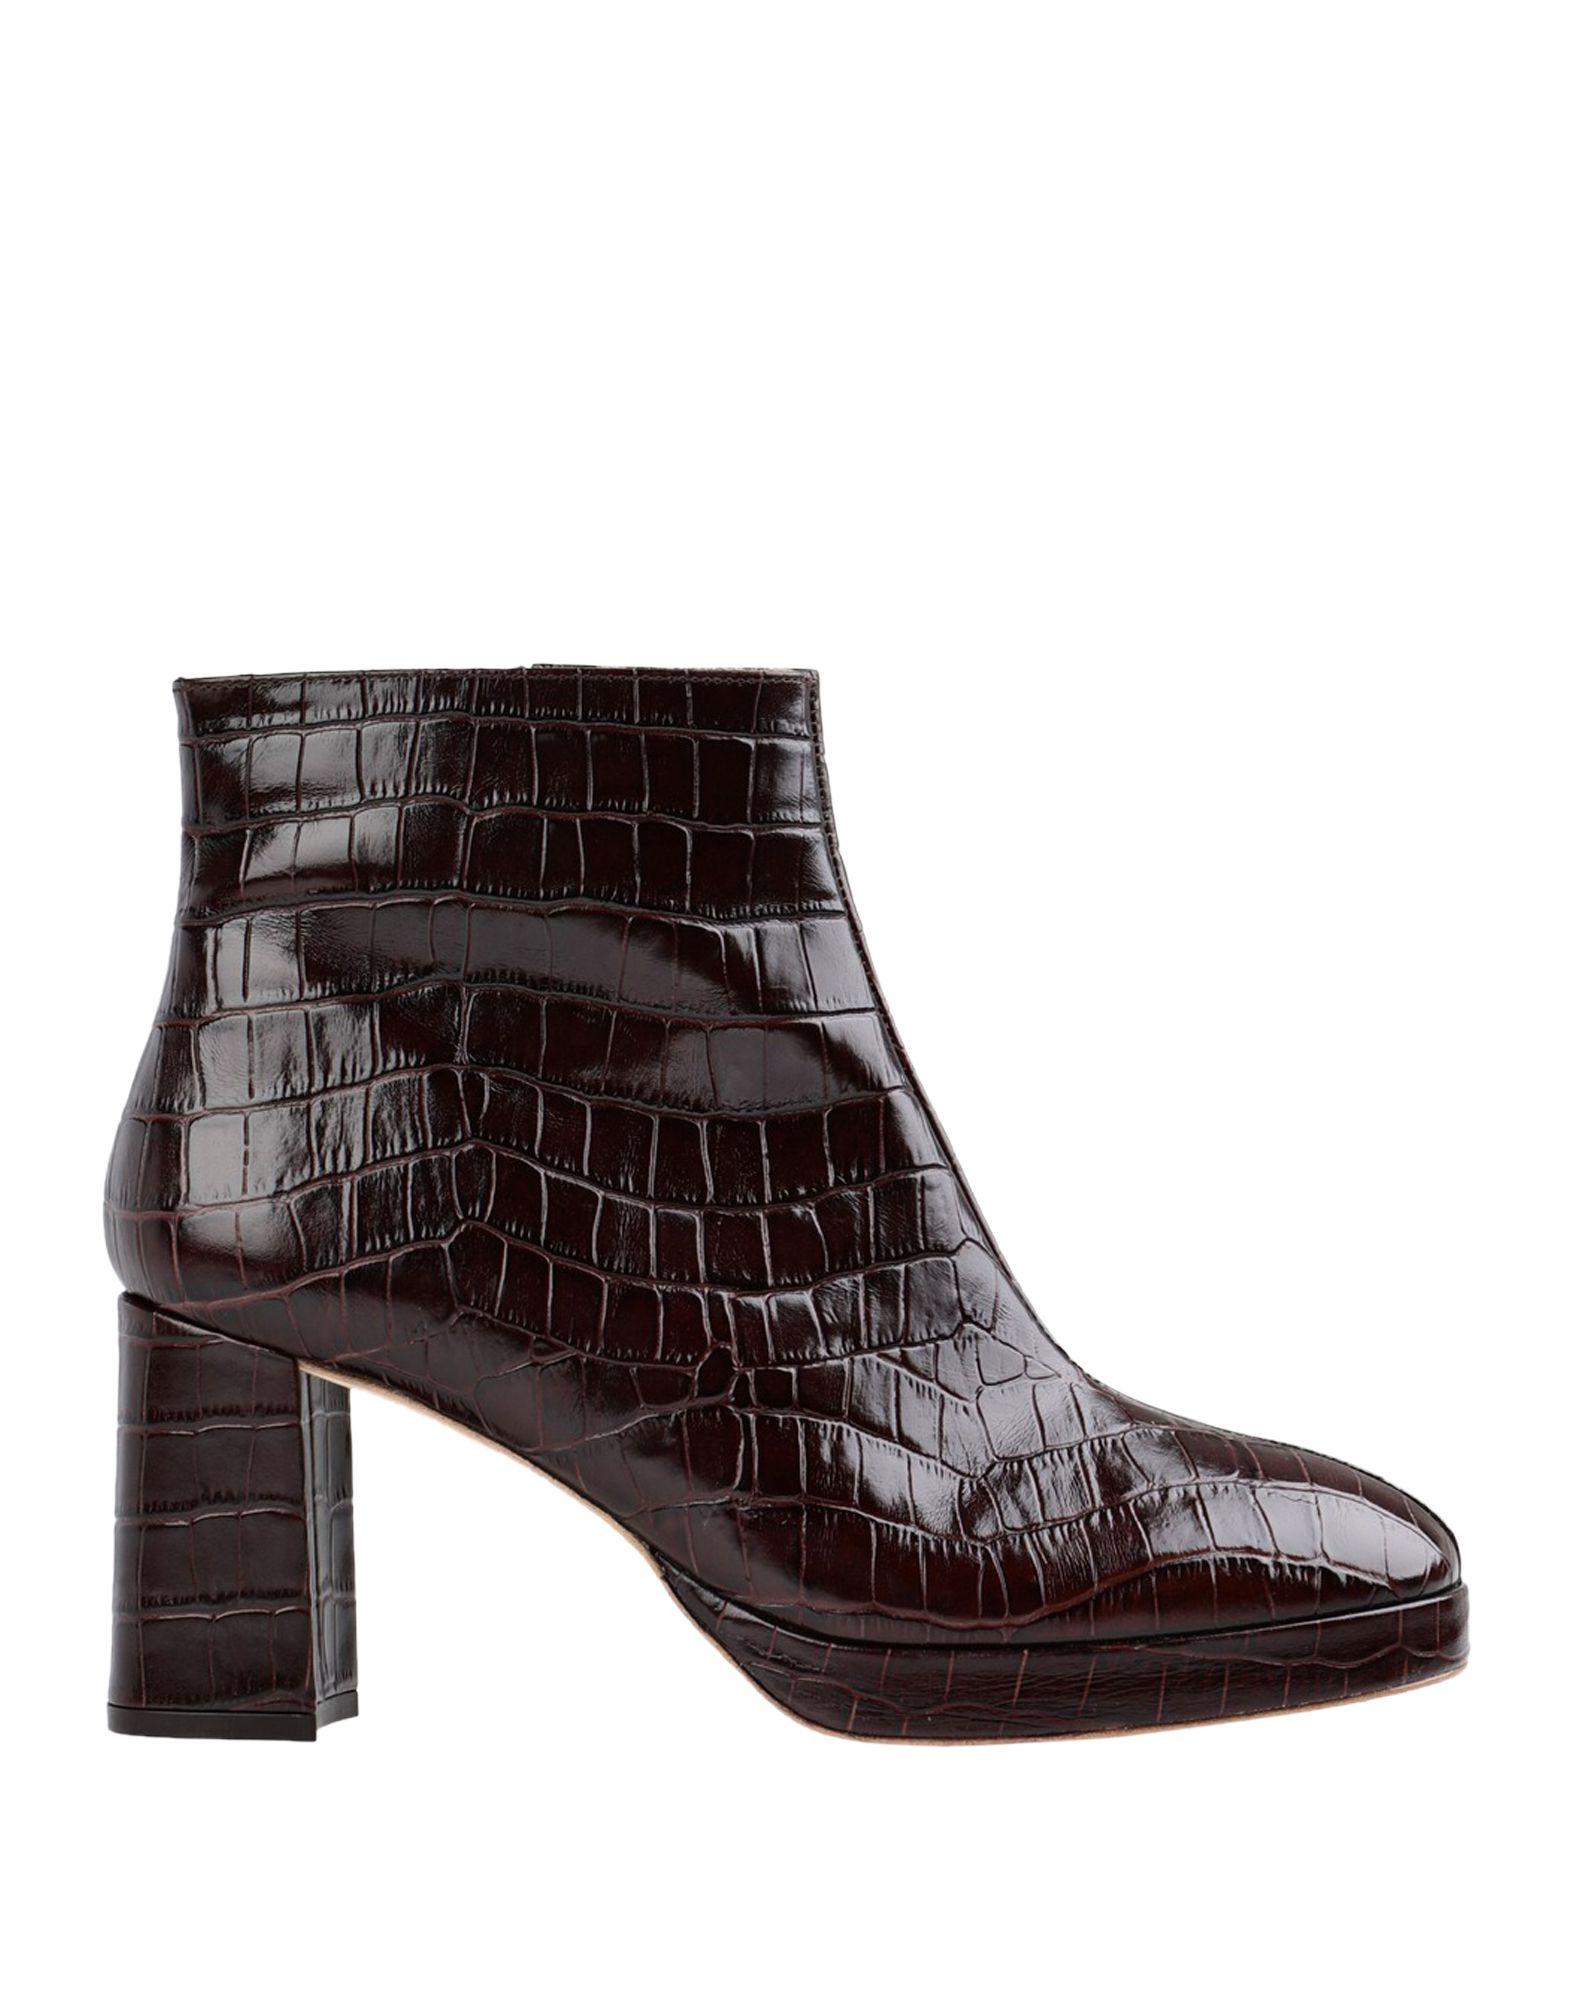 Miista Leather Ankle Boots in Dark Brown (Brown) - Lyst